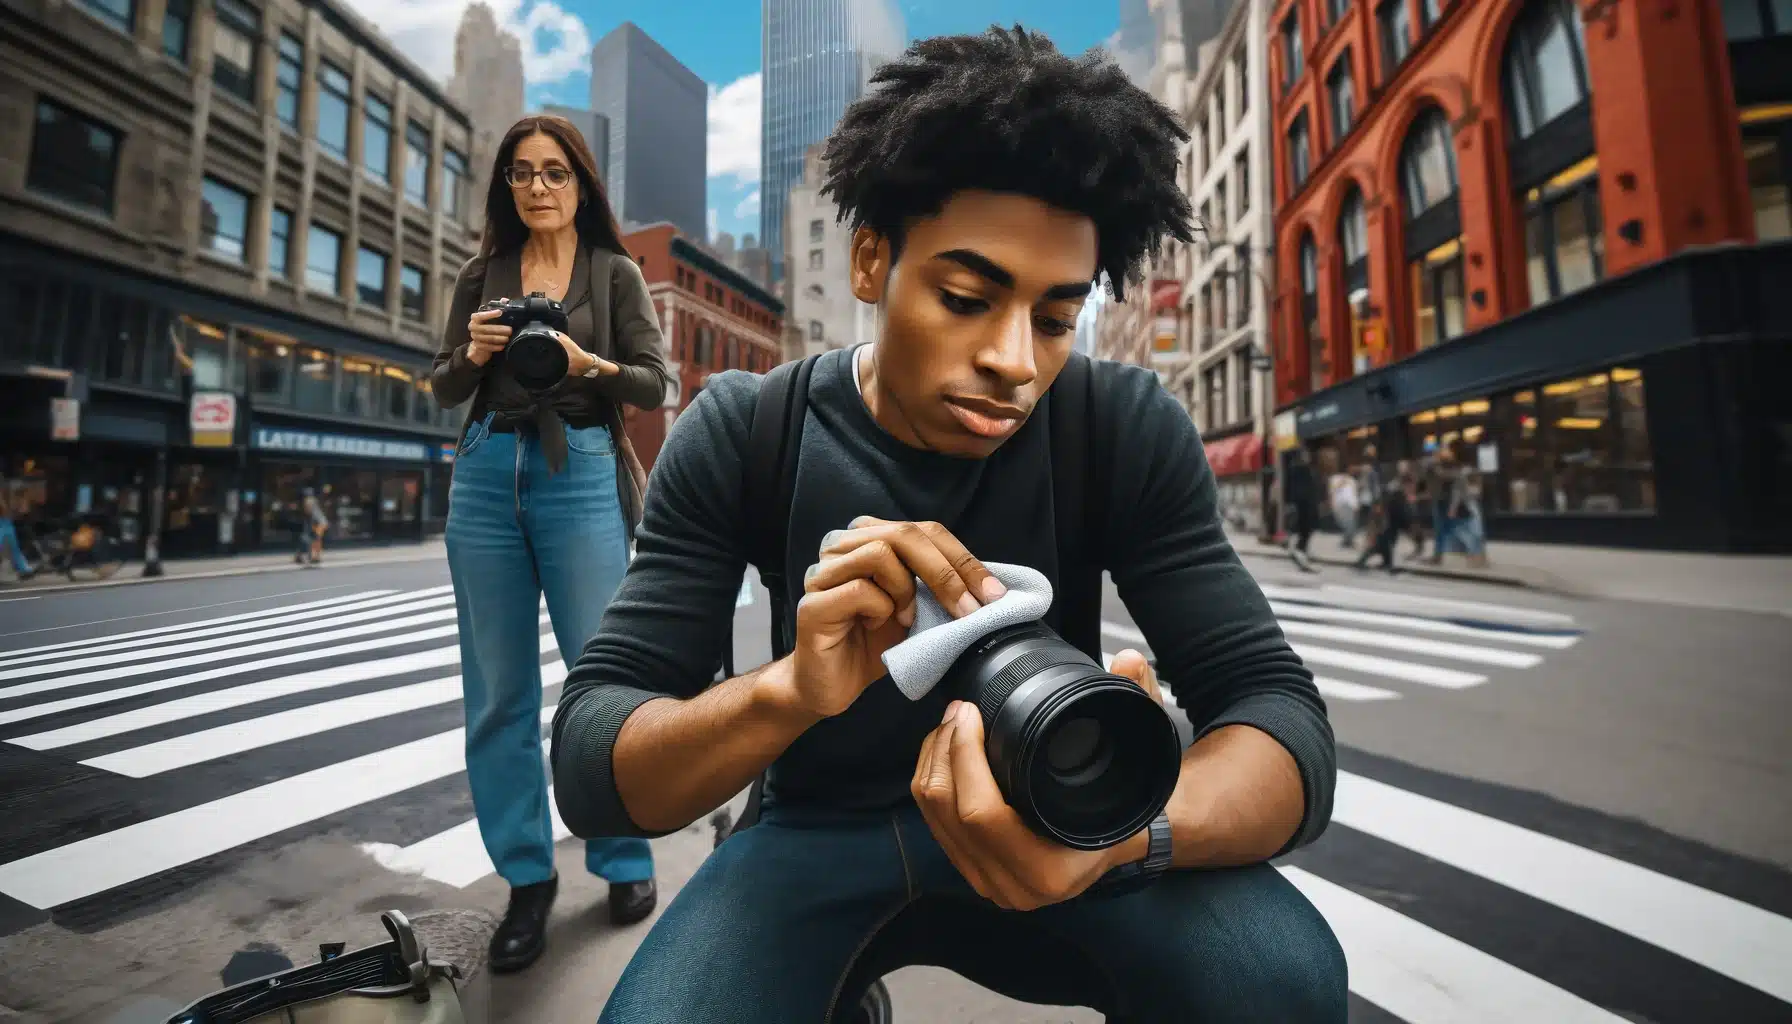 A young Black male meticulously cleans a camera lens on a bustling city street while a middle-aged Hispanic female captures photos, demonstrating how to clean camera lenses effectively in urban environments.